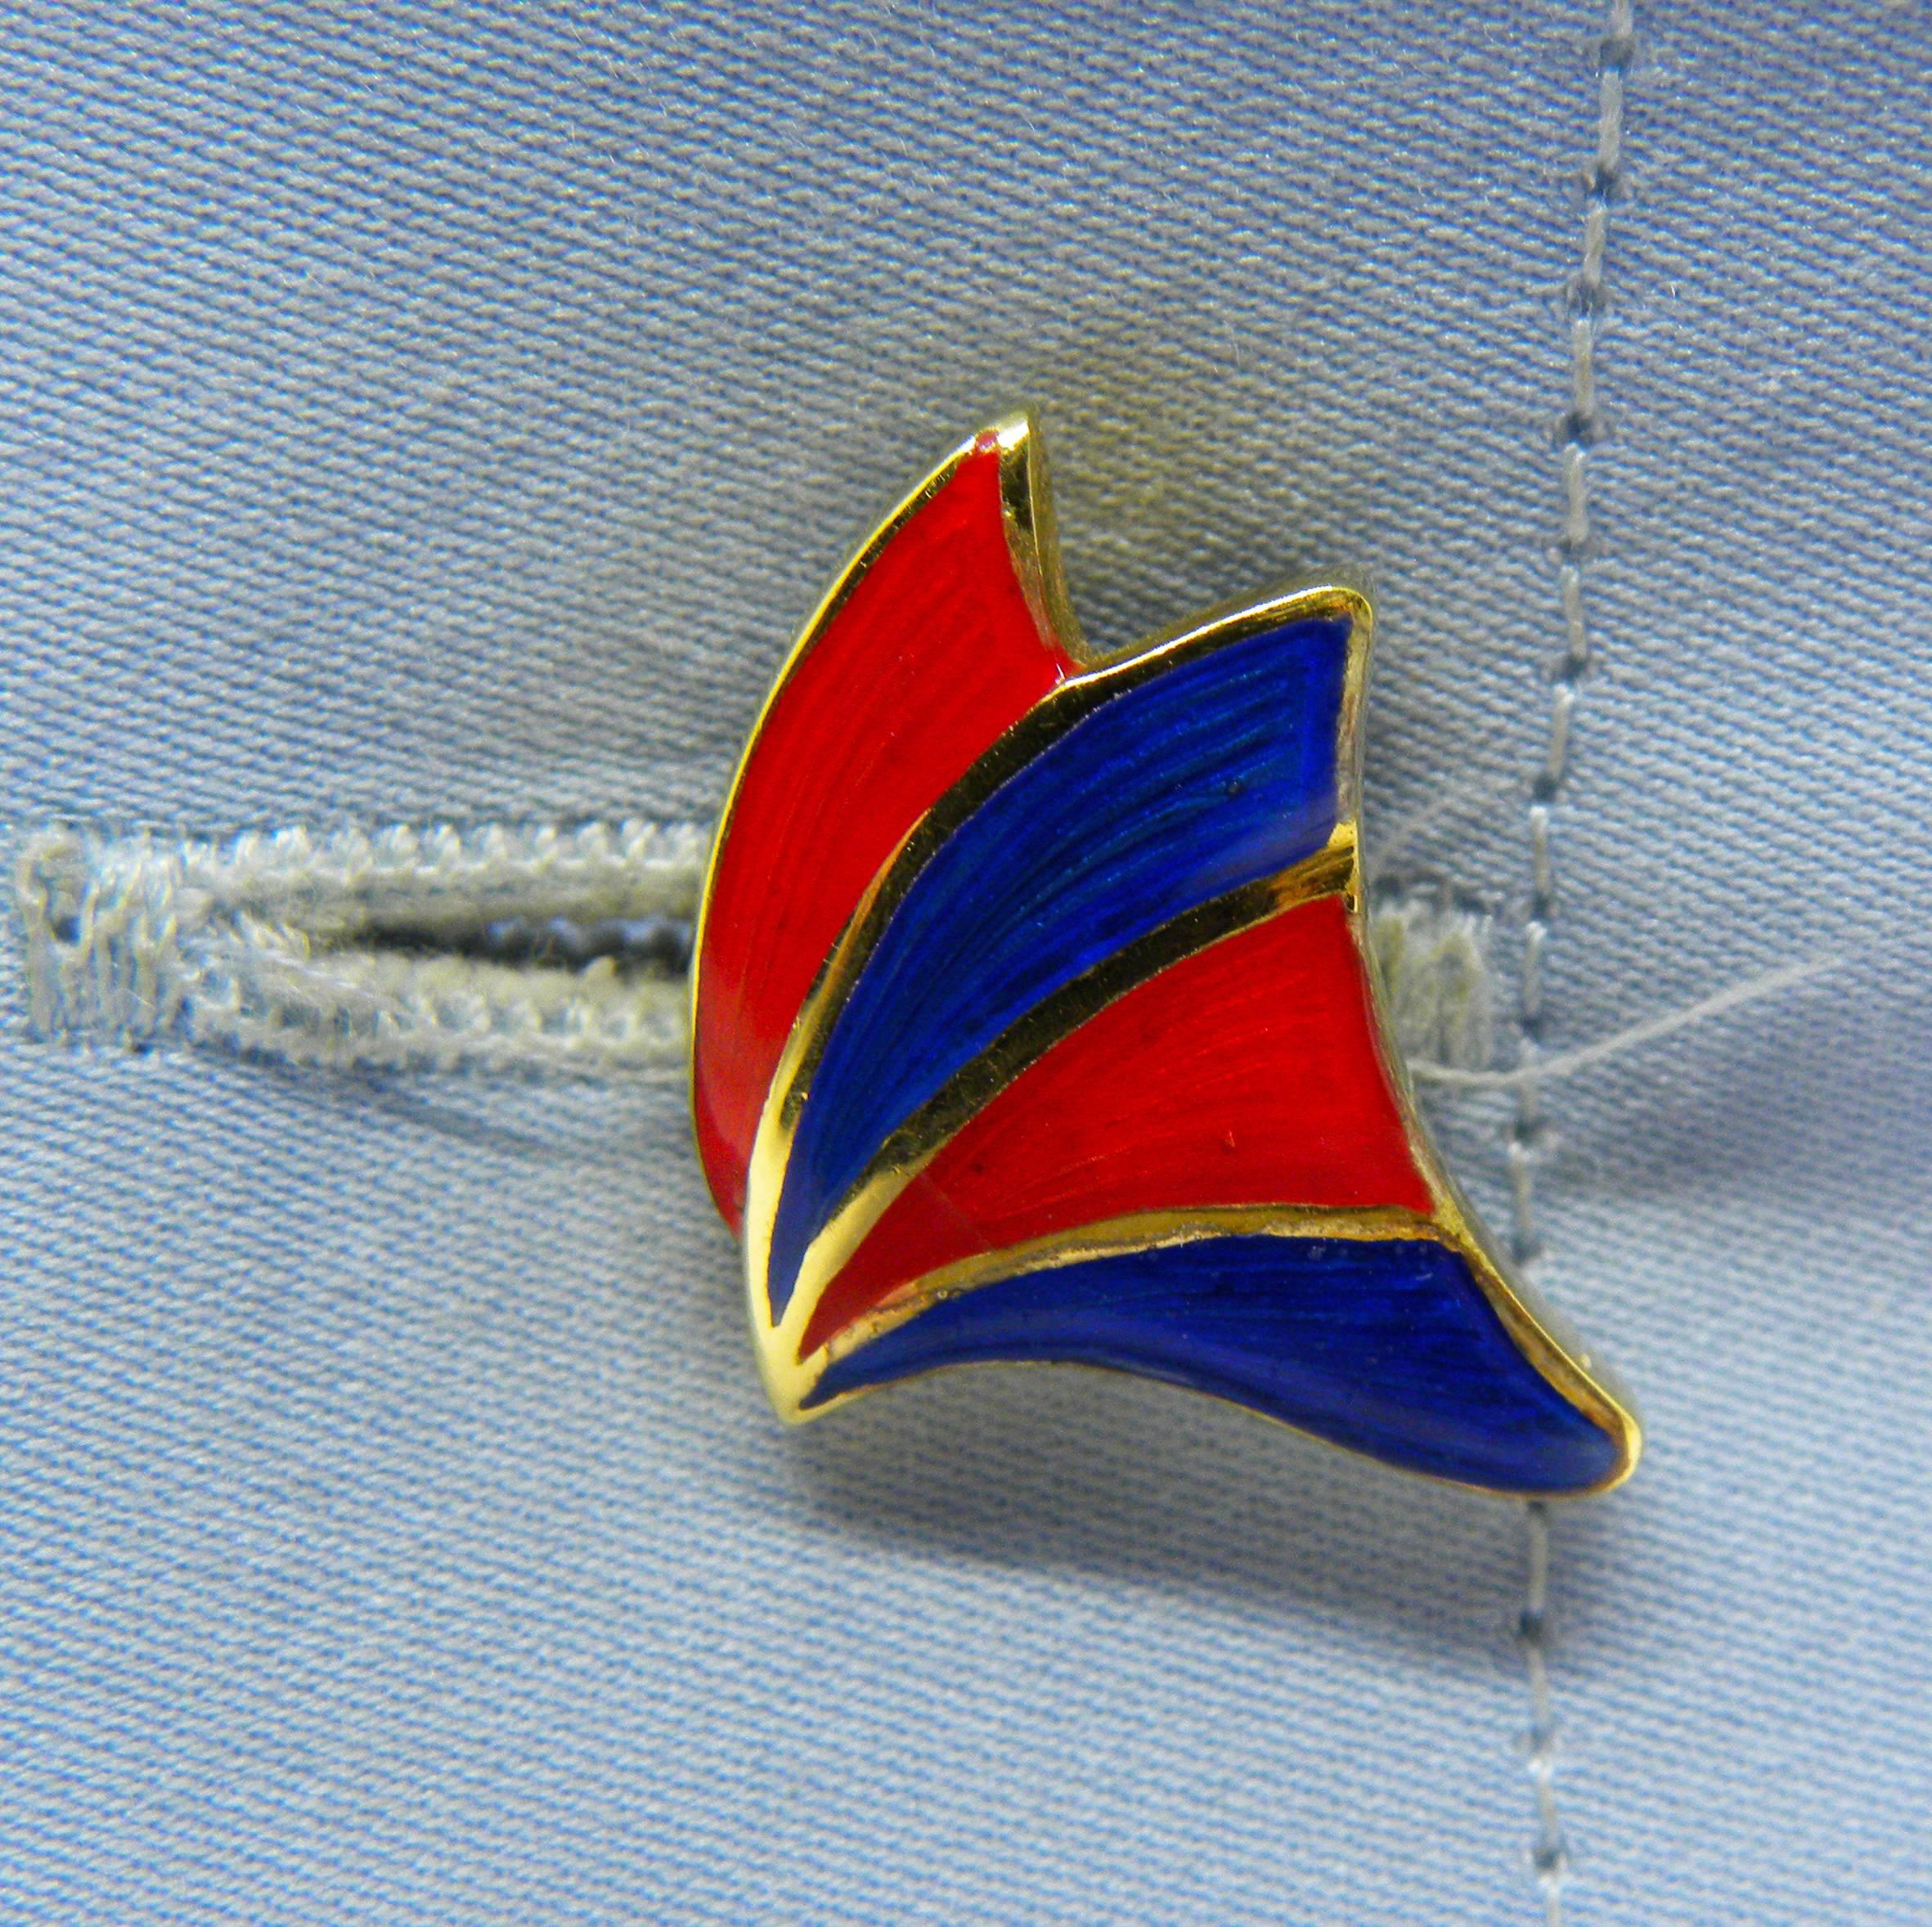 Unique Red and Blue Hand Enameled Butterfly Shaped 18 Carat yellow Gold Setting  Lapis Stick Back Cufflinks.
In our fitted suede leather tobacco box and pouch.